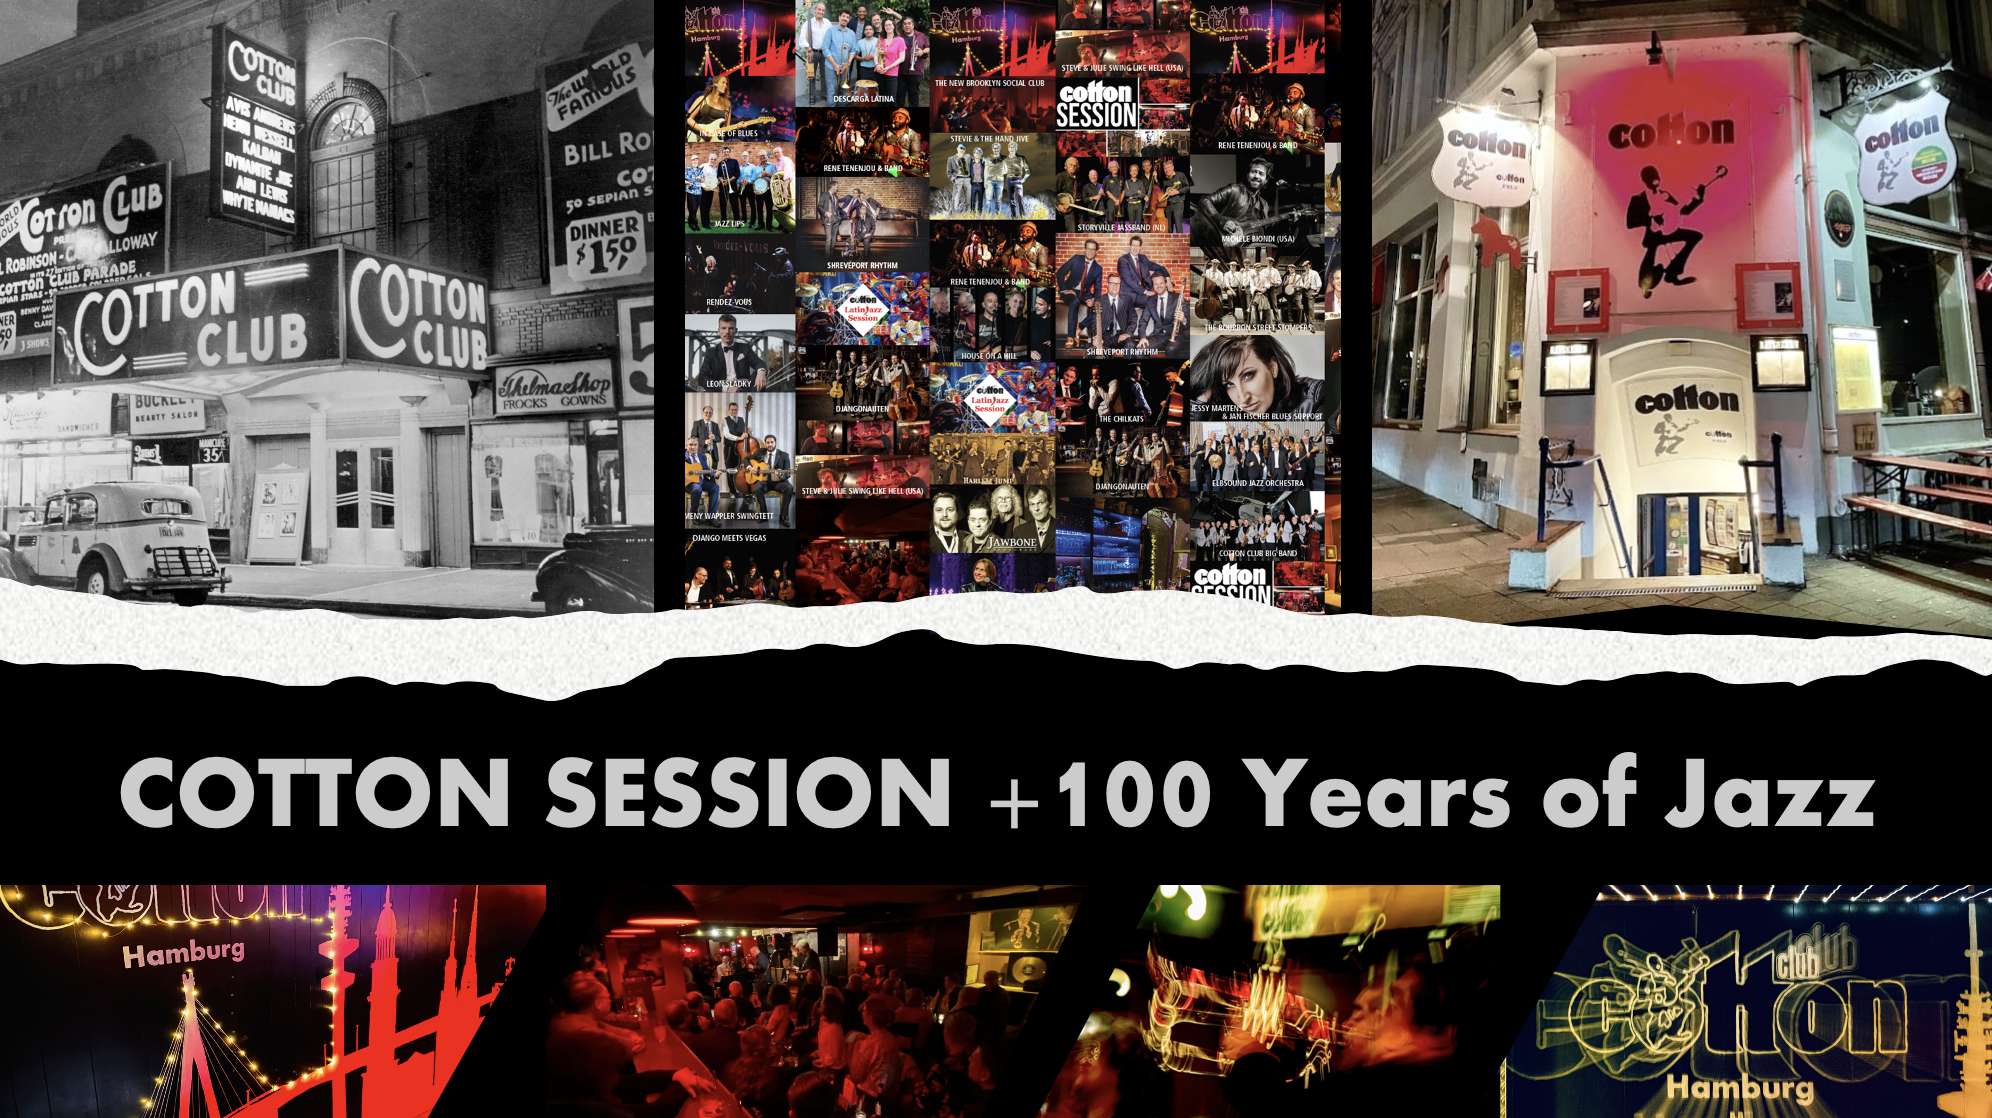 COTTON SESSION +100 YEARS OF JAZZ - led by Steve Wiseman (Swing & Mainstream)